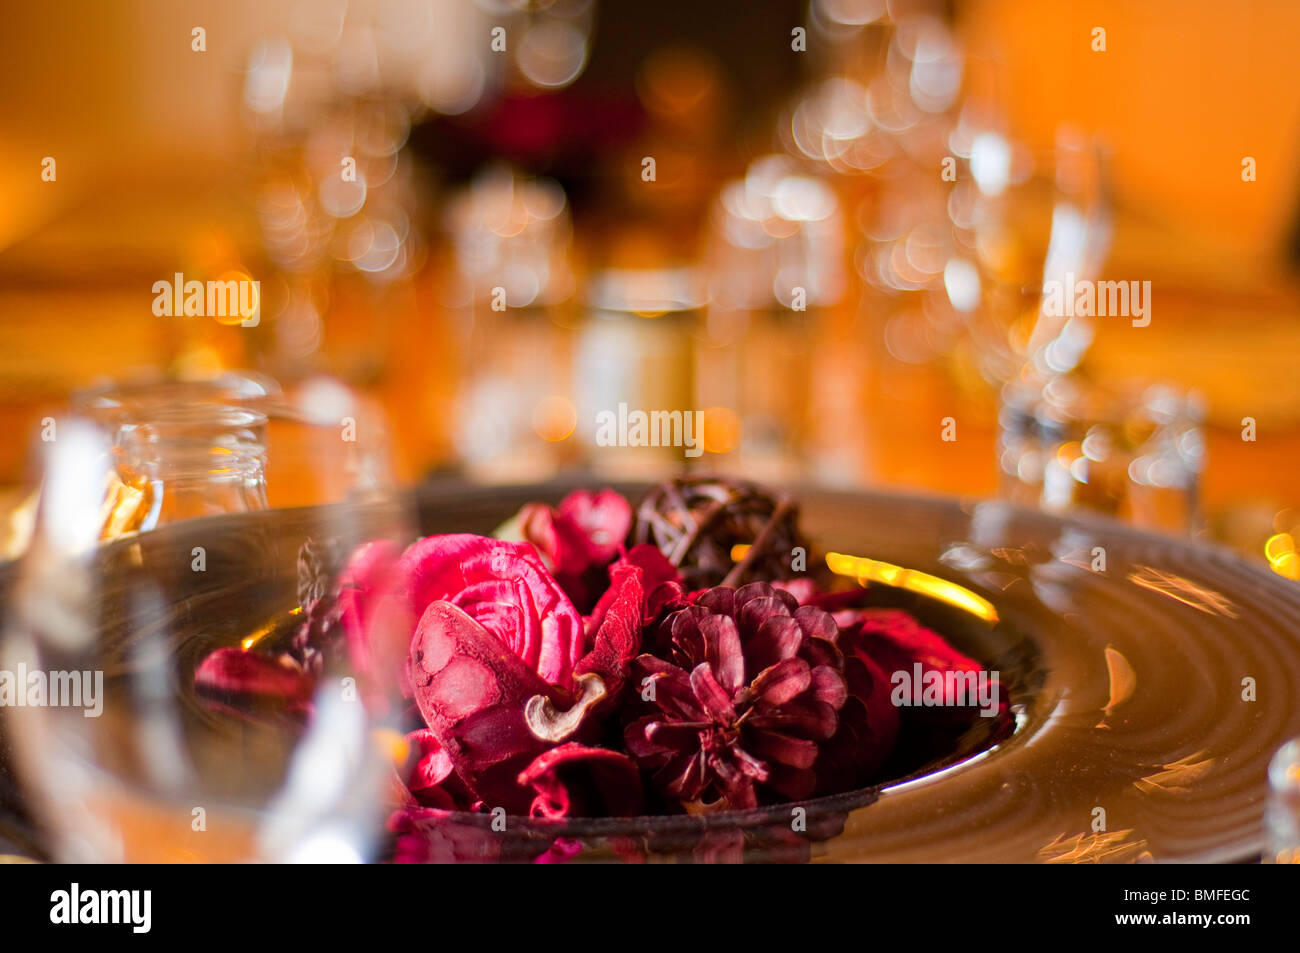 Potpourri bowl arranged on a dining table with wine glasses Stock Photo